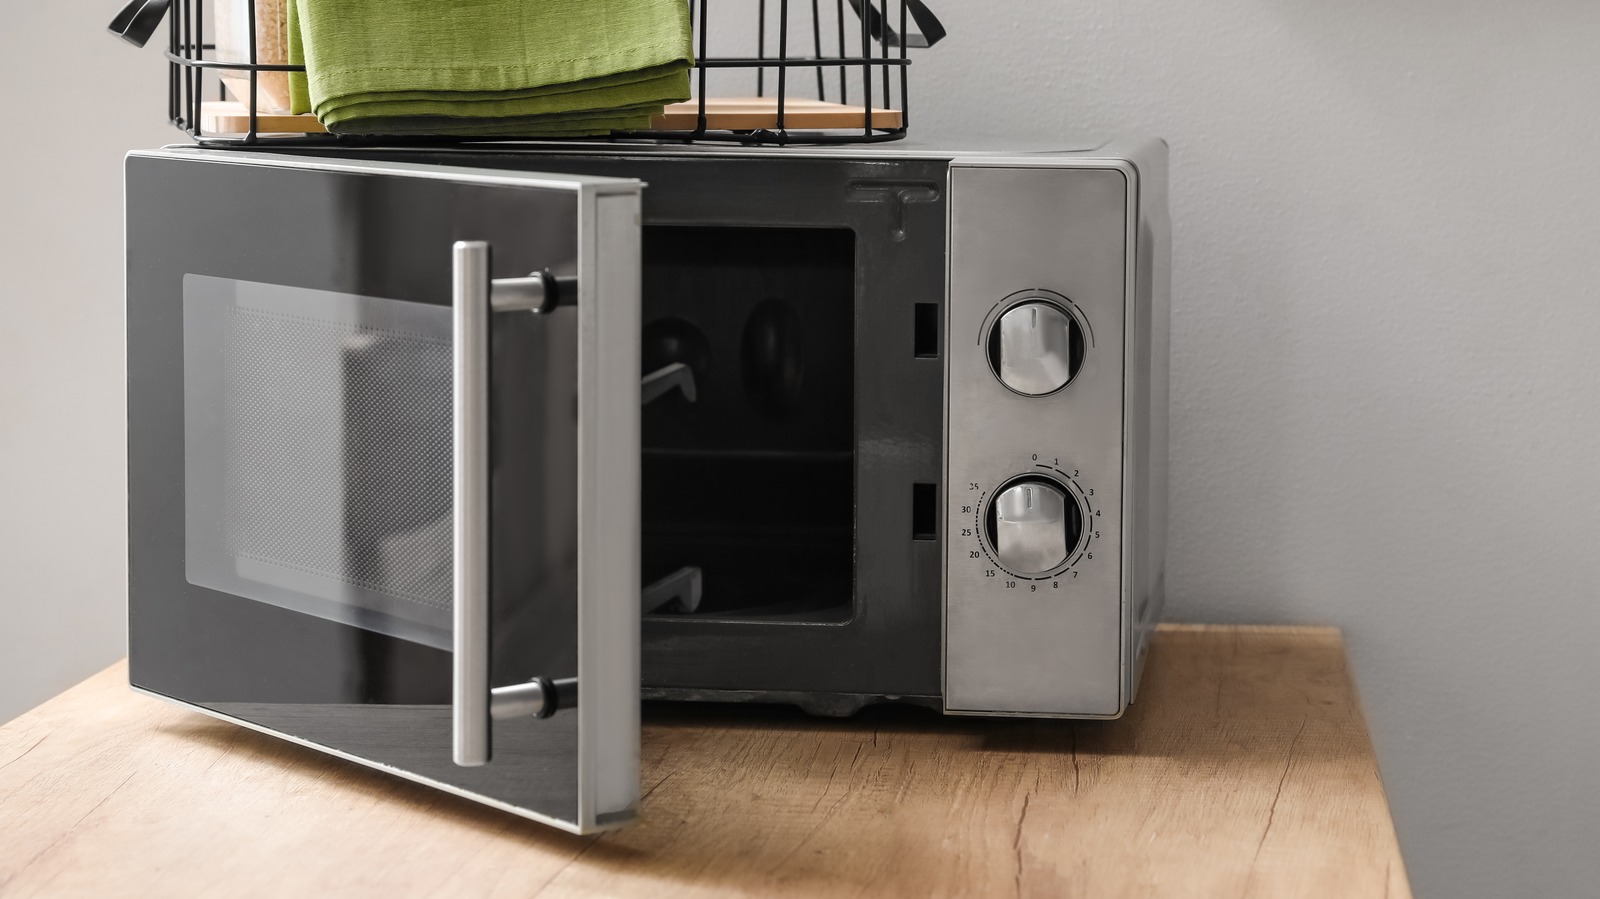 This wall-mounted microwave is the perfect addition to any tiny